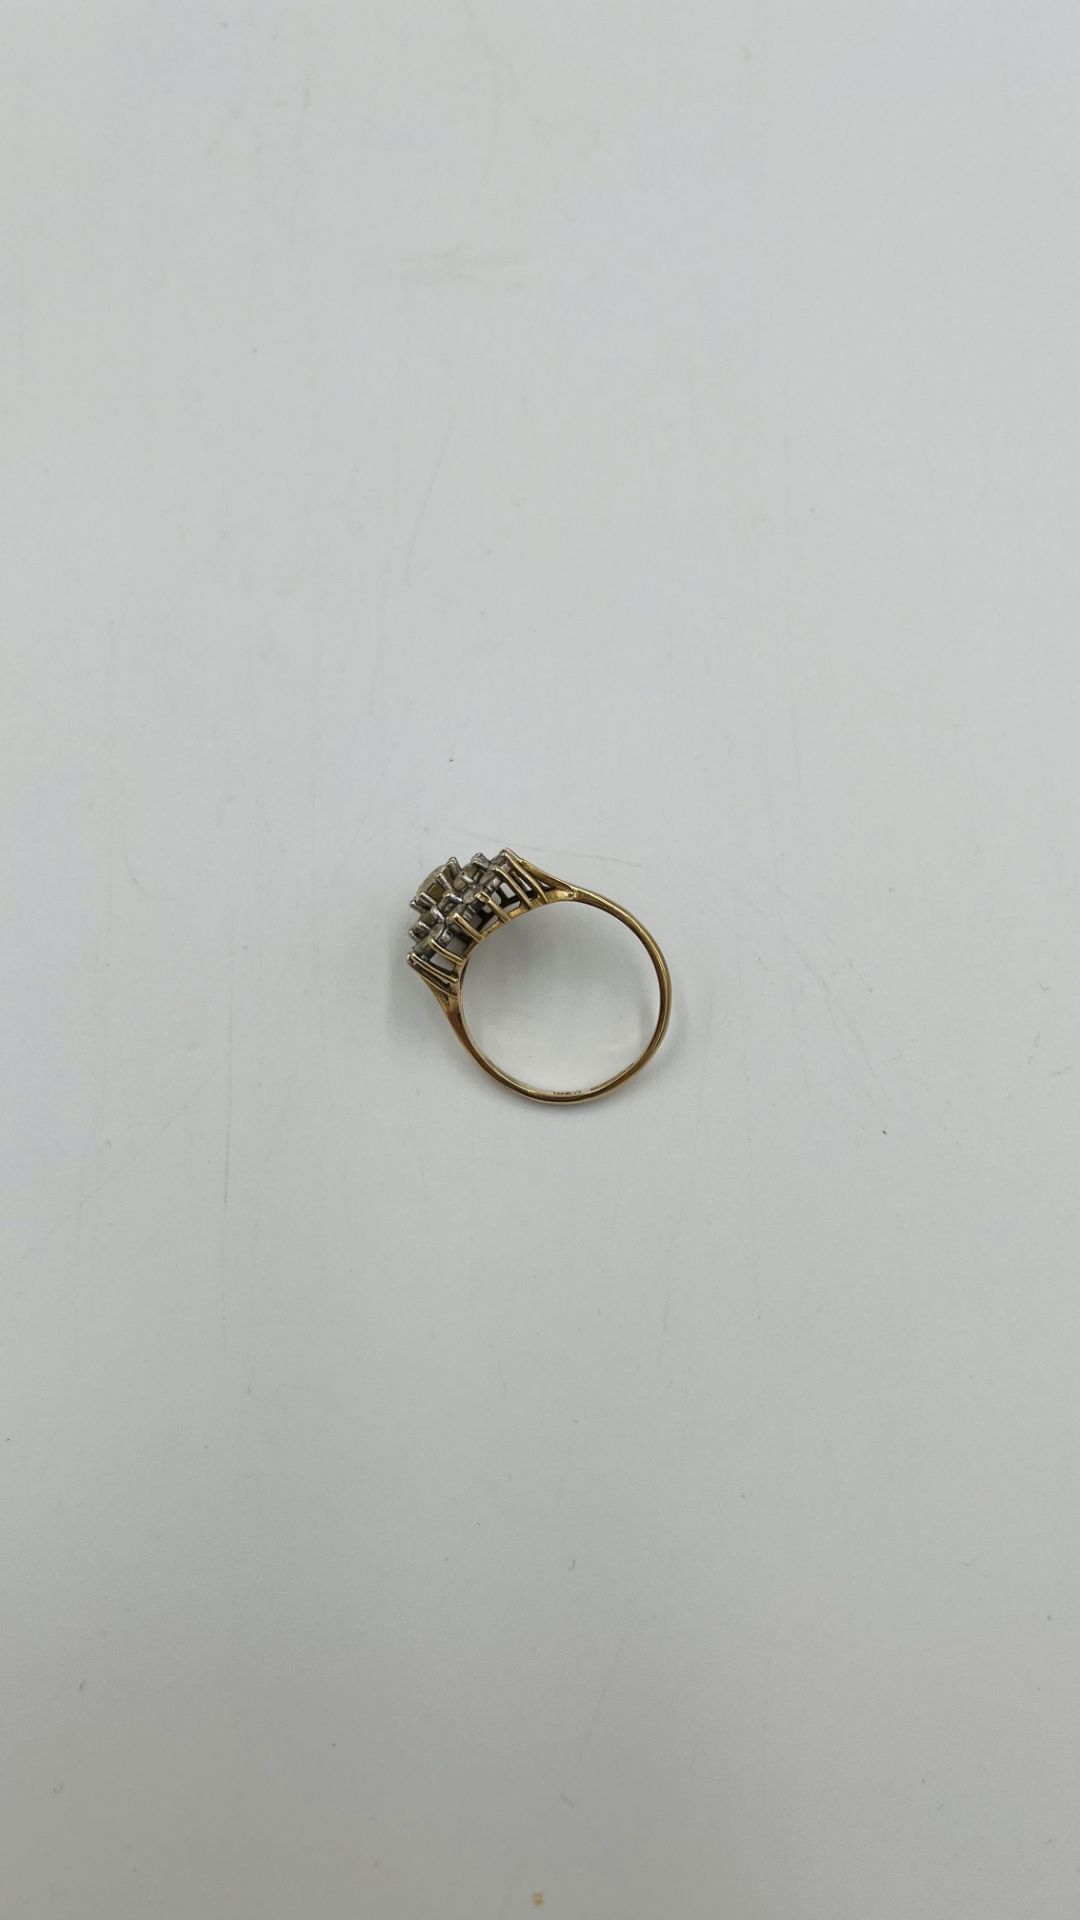 9ct gold white stone cocktail ring - Image 5 of 5